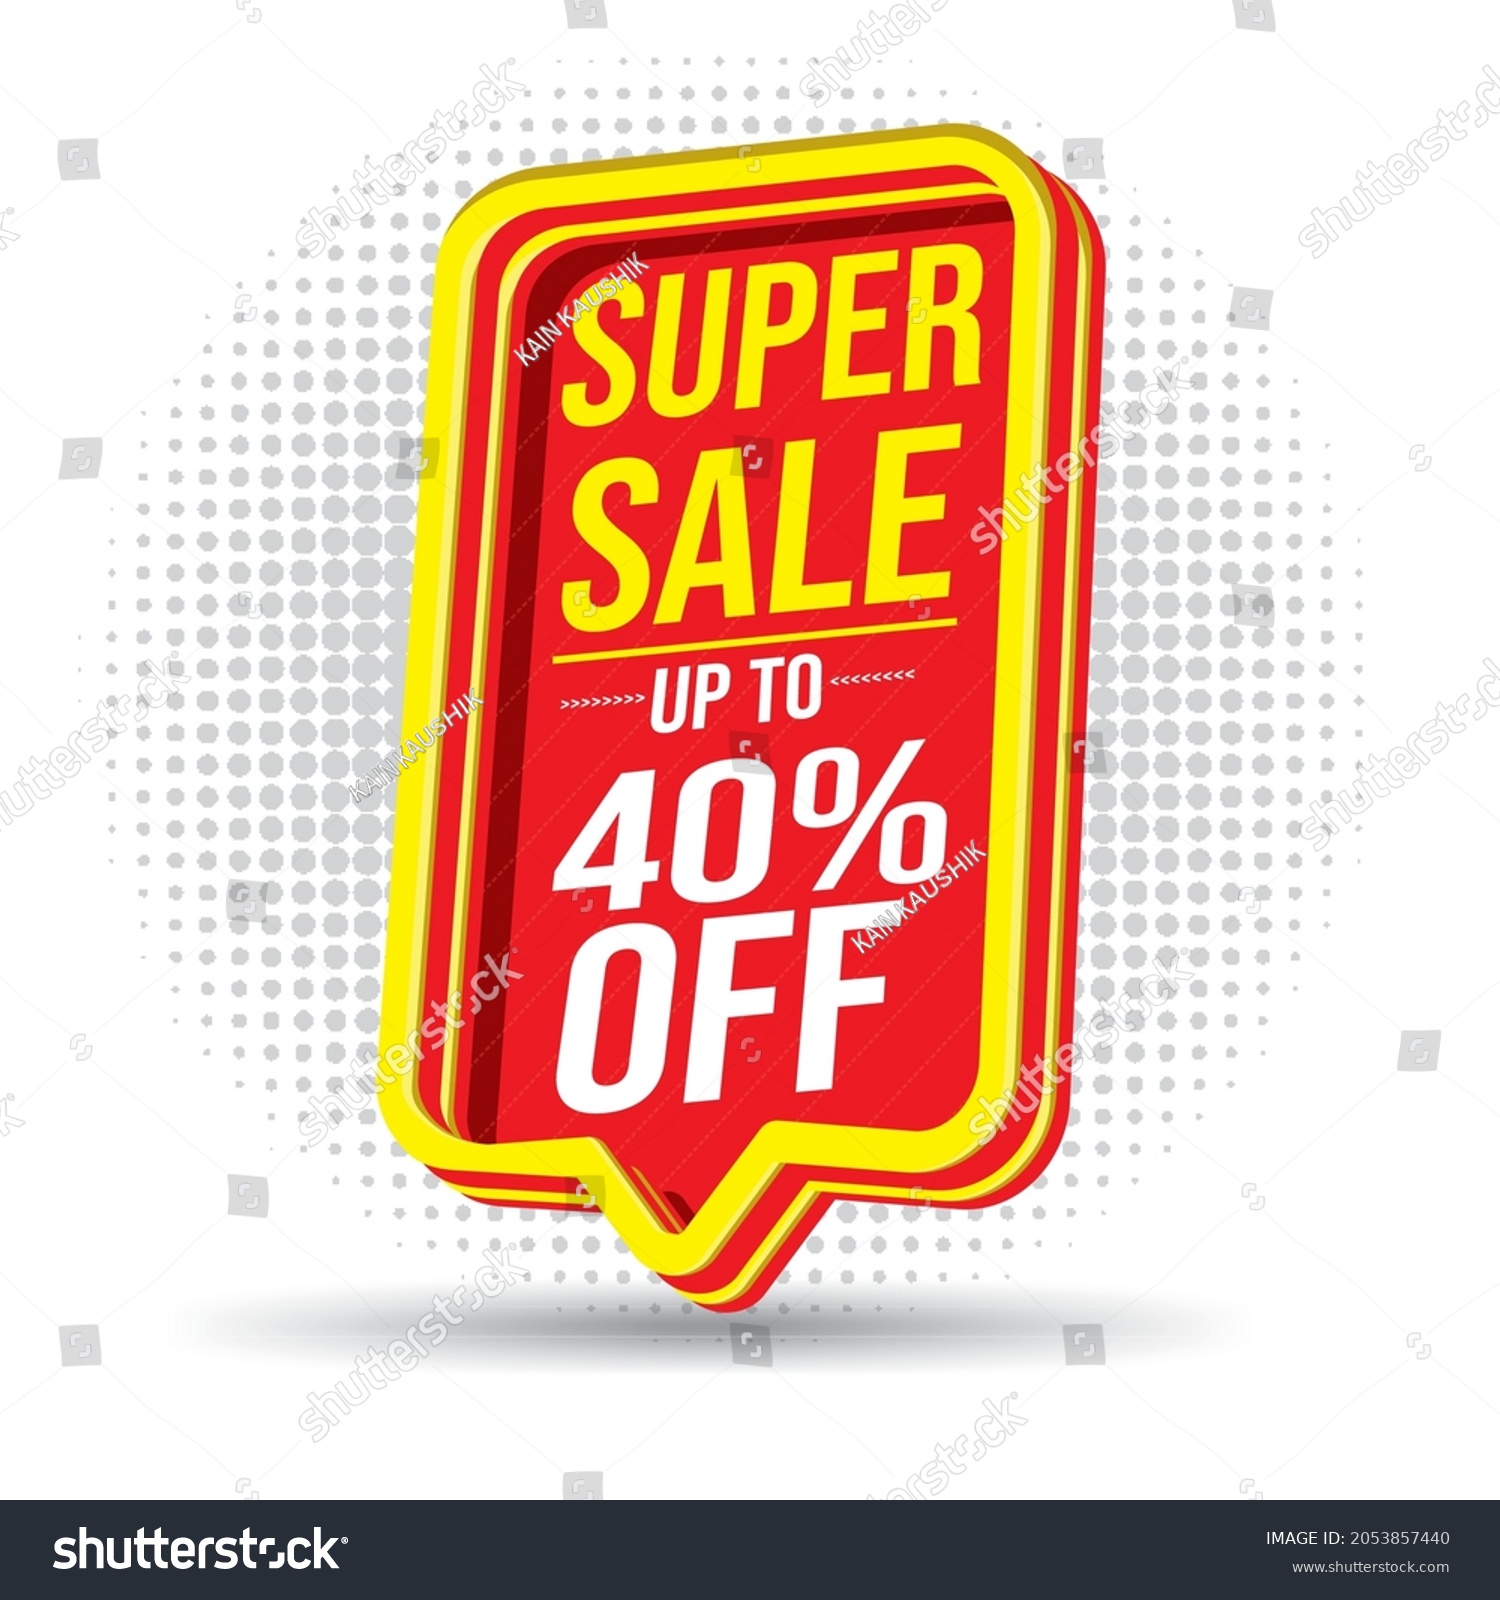 SVG of Super Sale Red 3d Text Box, up to 40%, elements with designs, sales, offers, discounts, special, ultimate, unlimited, big, 40% offers, upto, yearend sale, mega sale, latest, special, shop now svg